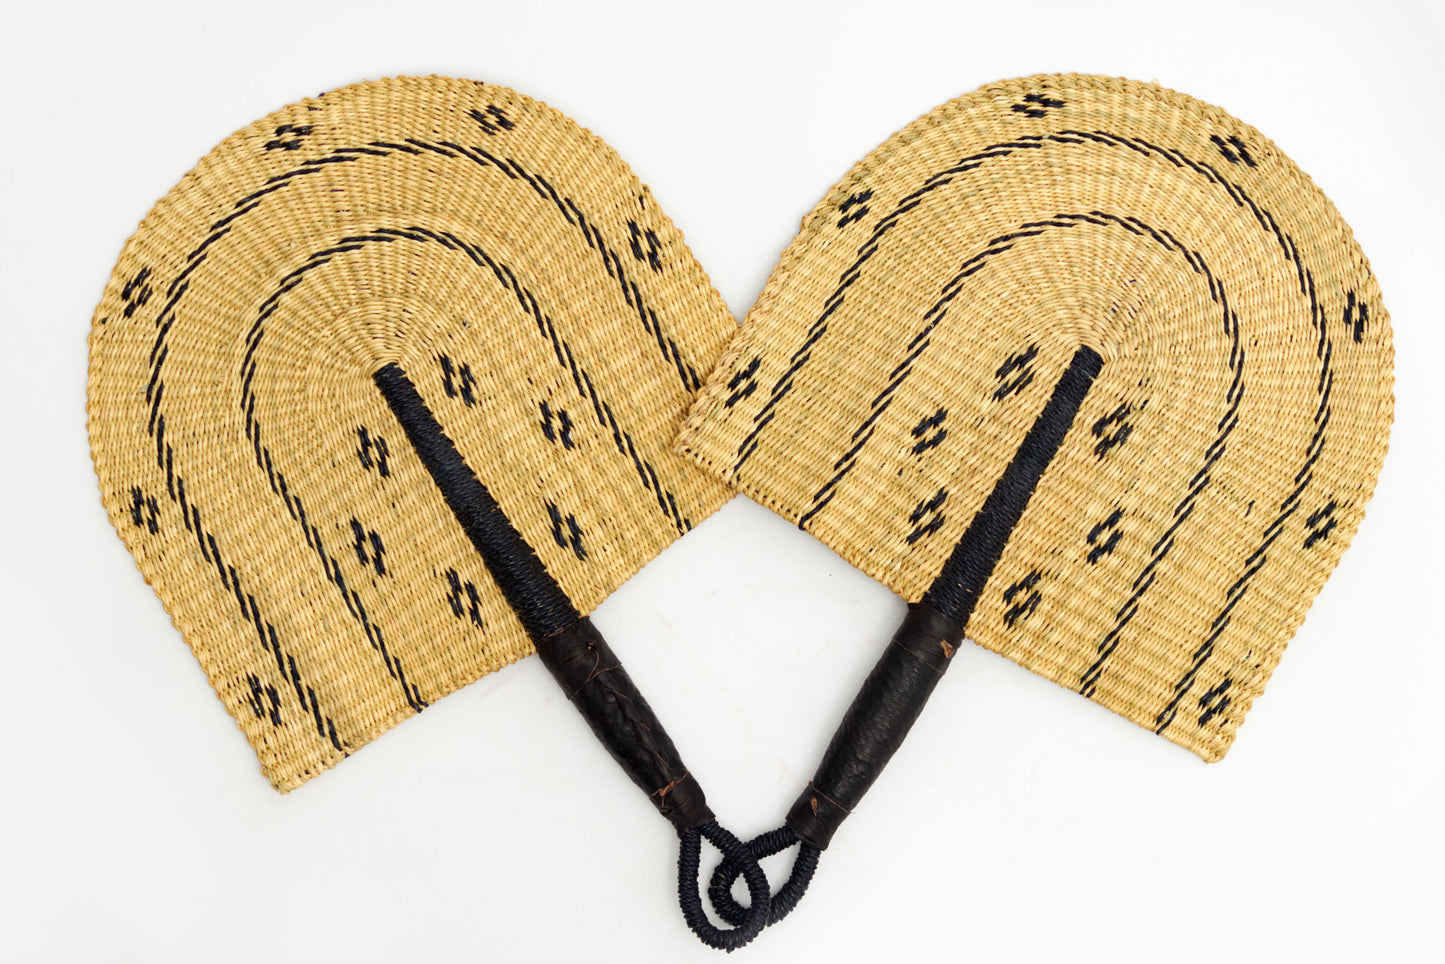 Lucy Straw Woven Handfan(Leather Based Handle)